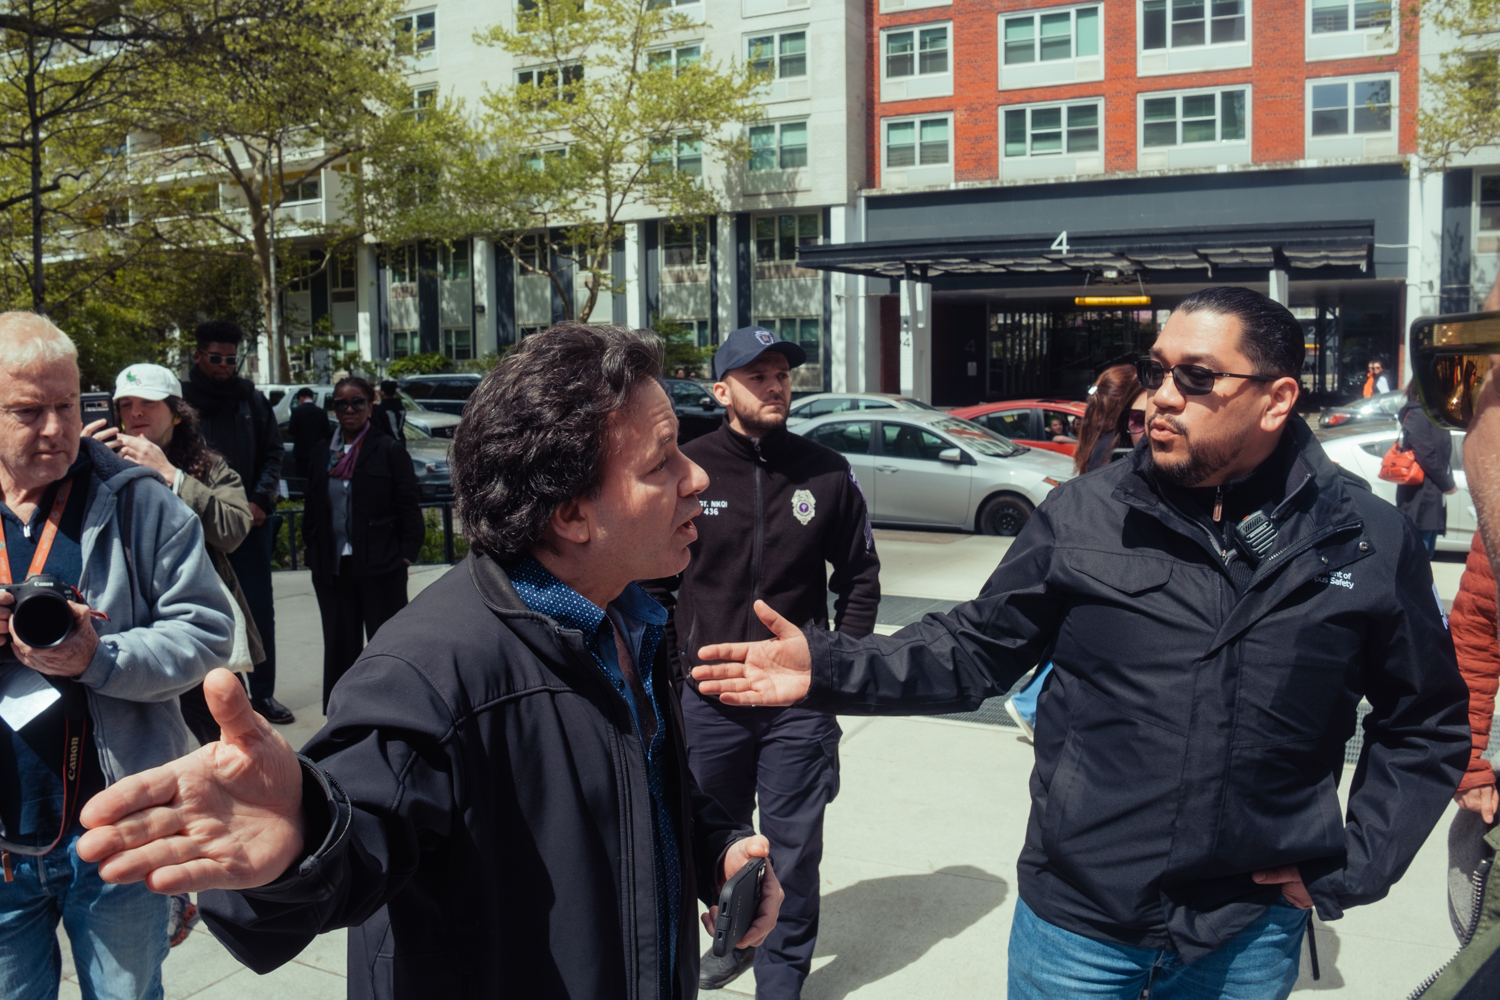 A Campus Safety officer confronts a counterprotester.